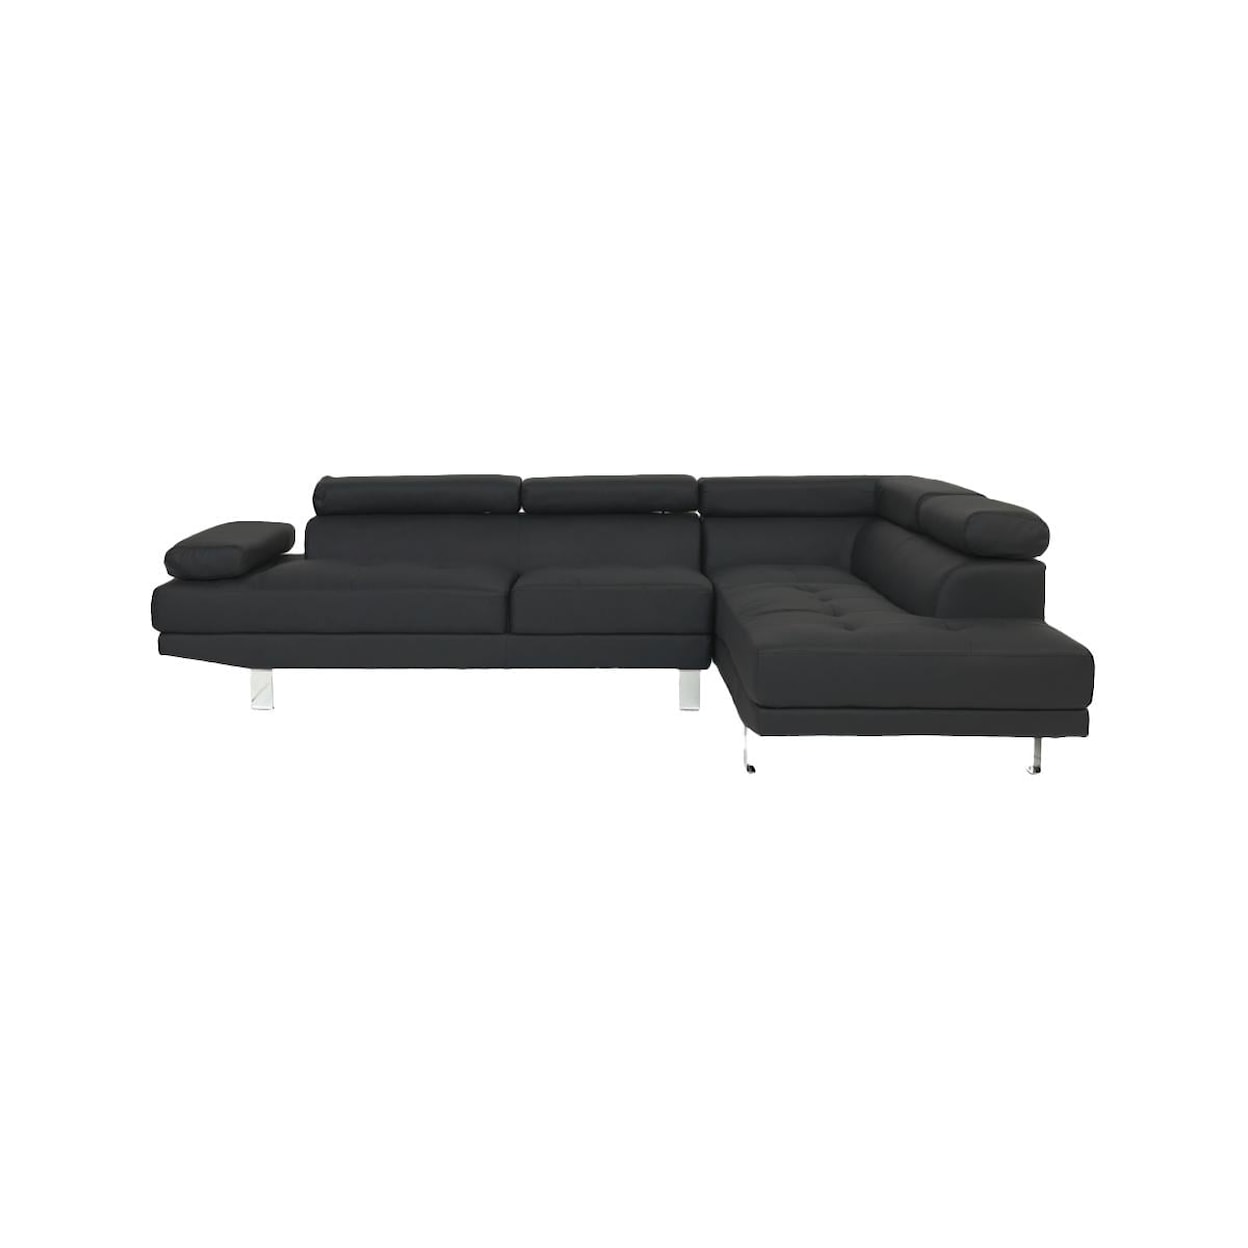 Poundex Enzo ENZO BLACK 2 PIECE CHAISE SECTIONAL |